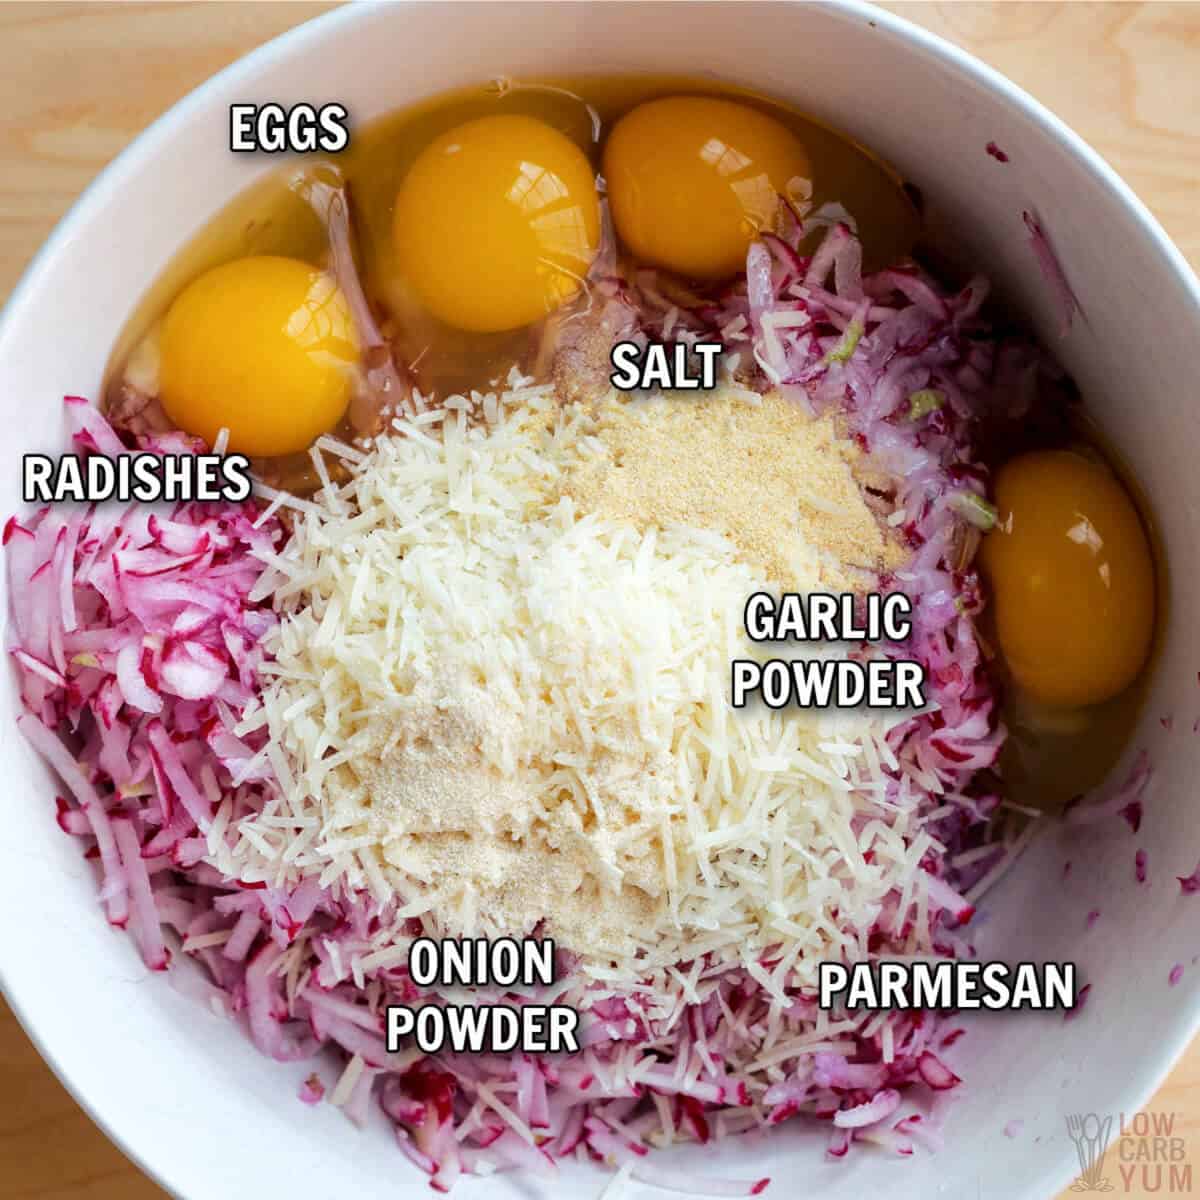 ingredients used in the recipe.